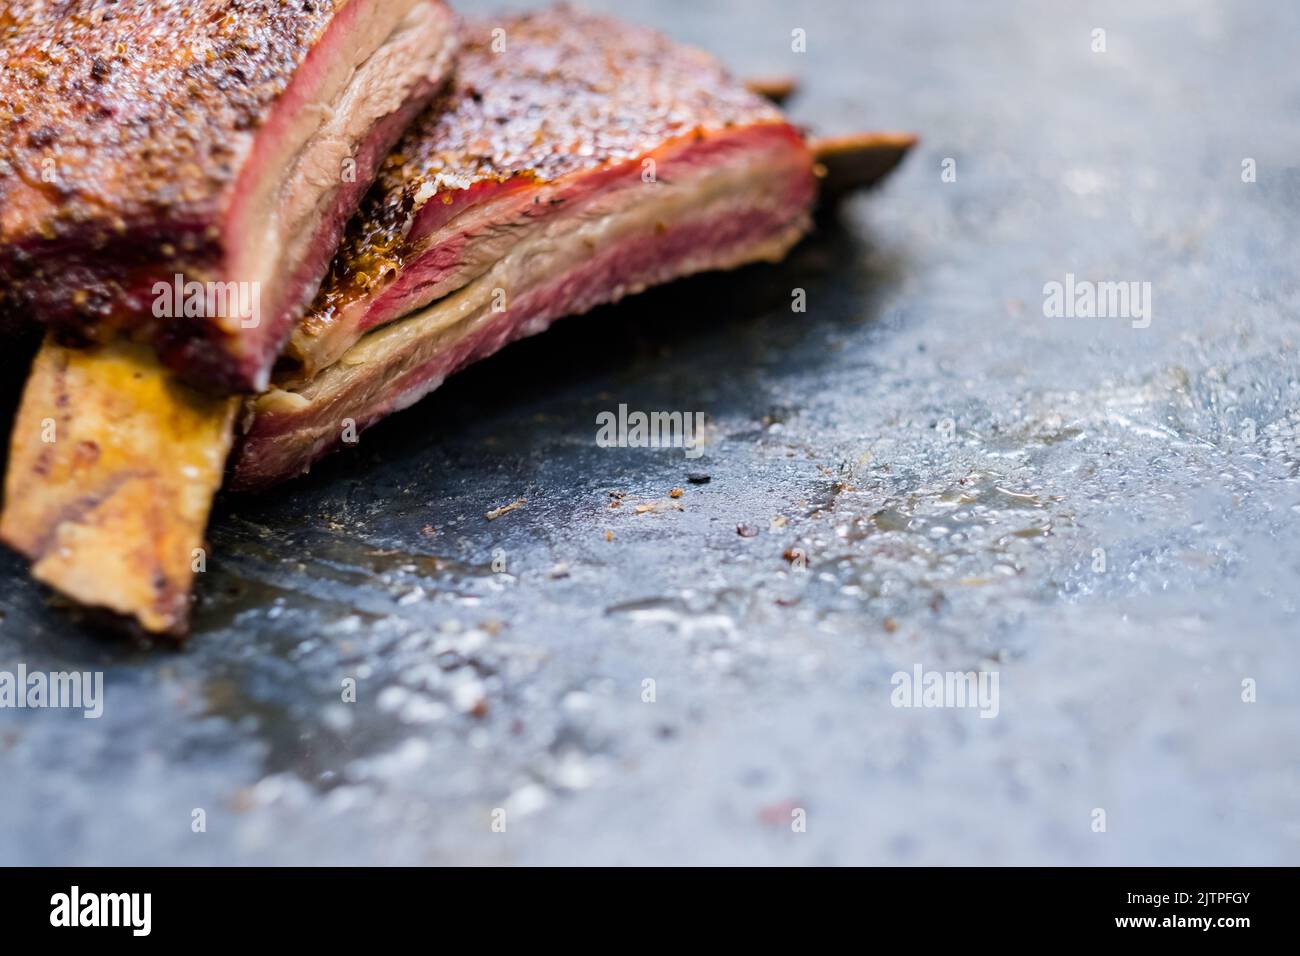 grill restaurant meat recipe smoked beef ribs Stock Photo